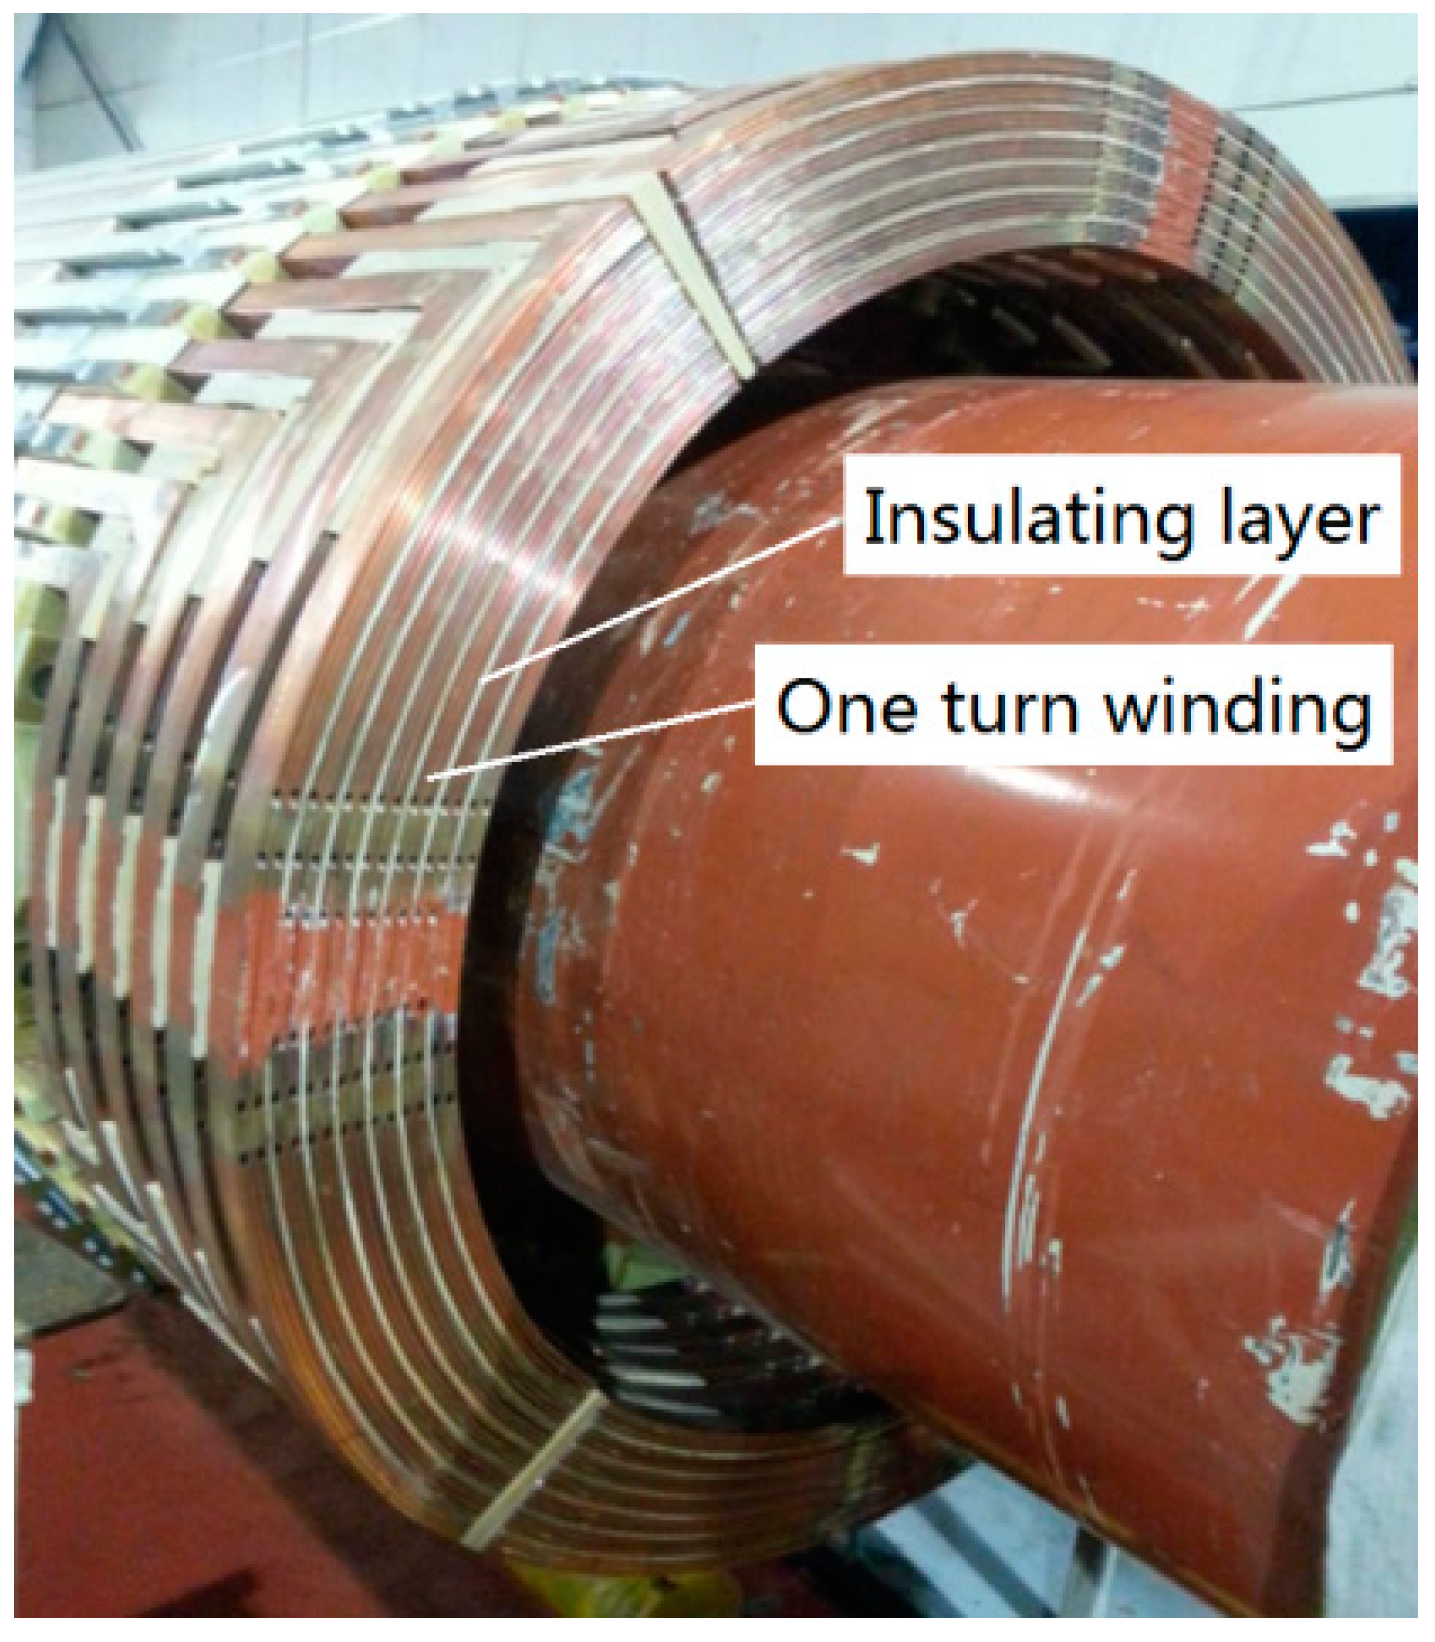 Energies | Free Full-Text | Anti-Interference and Location Performance for  Turn-to-Turn Short Circuit Detection in Turbo-Generator Rotor Windings